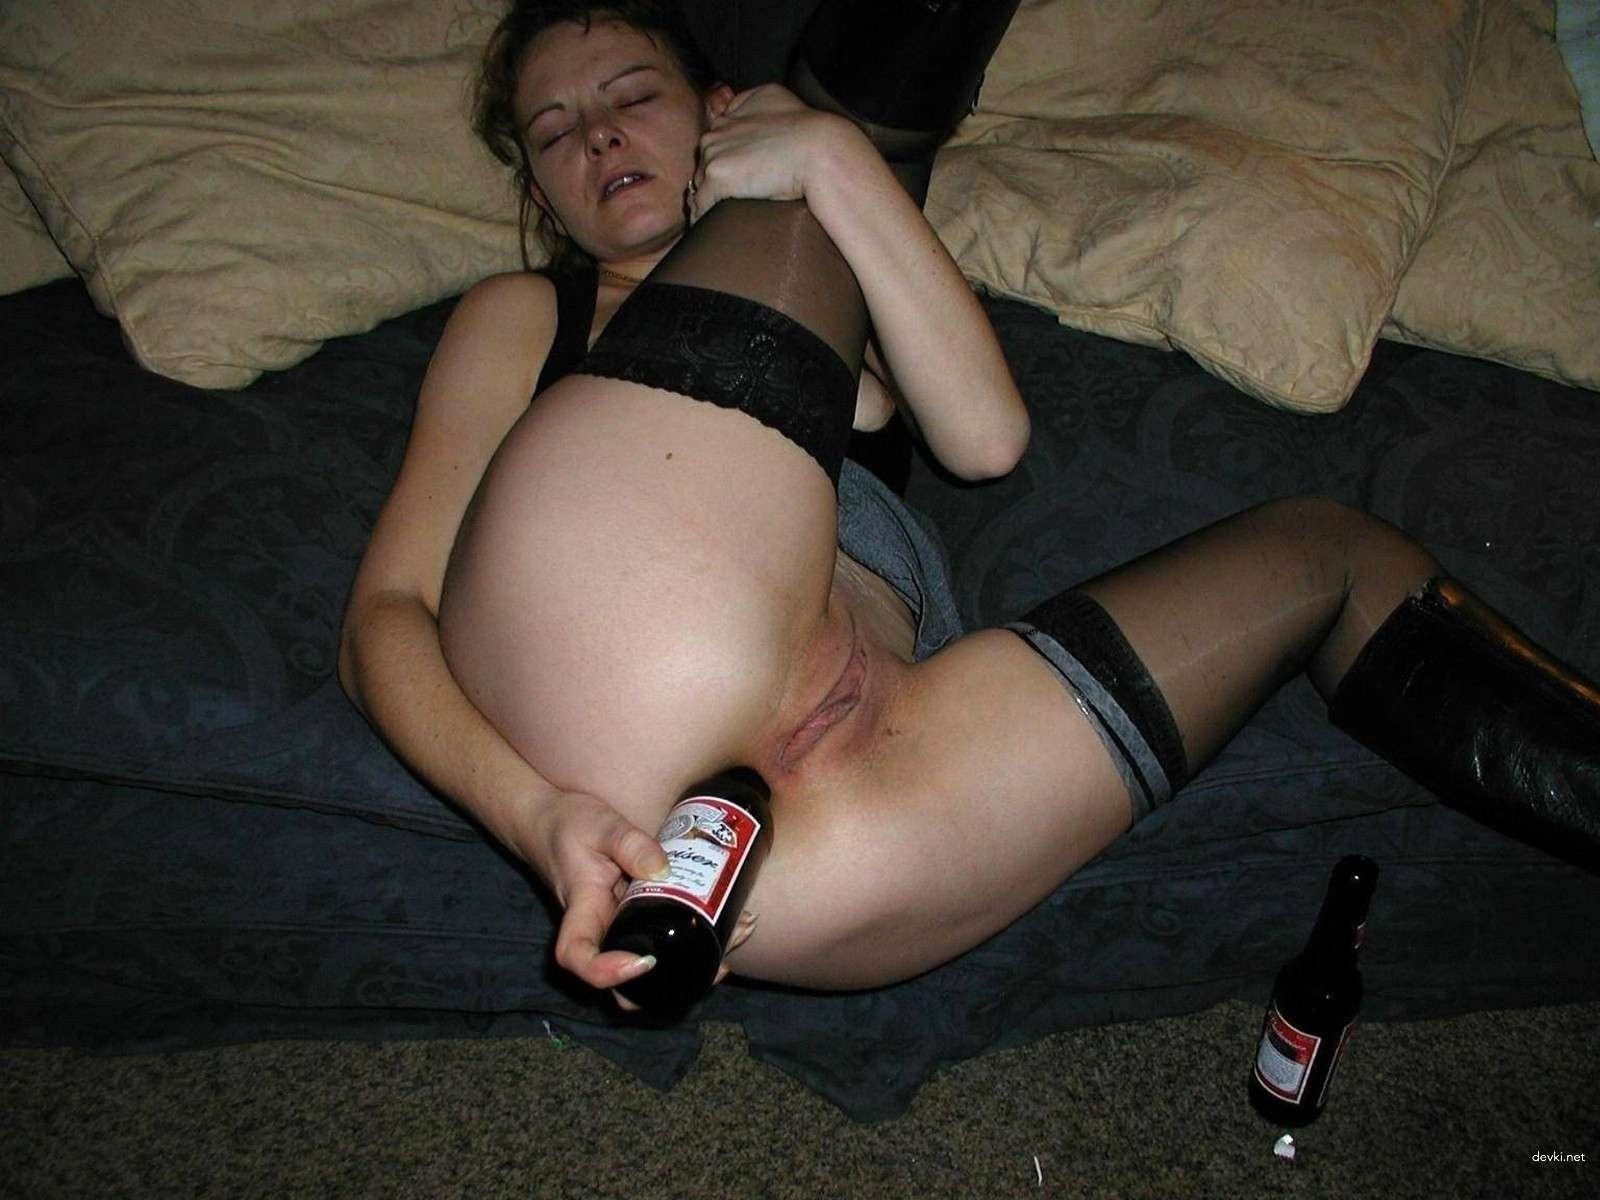 Fucking HIS WIFE with A Bottle (87 photos)